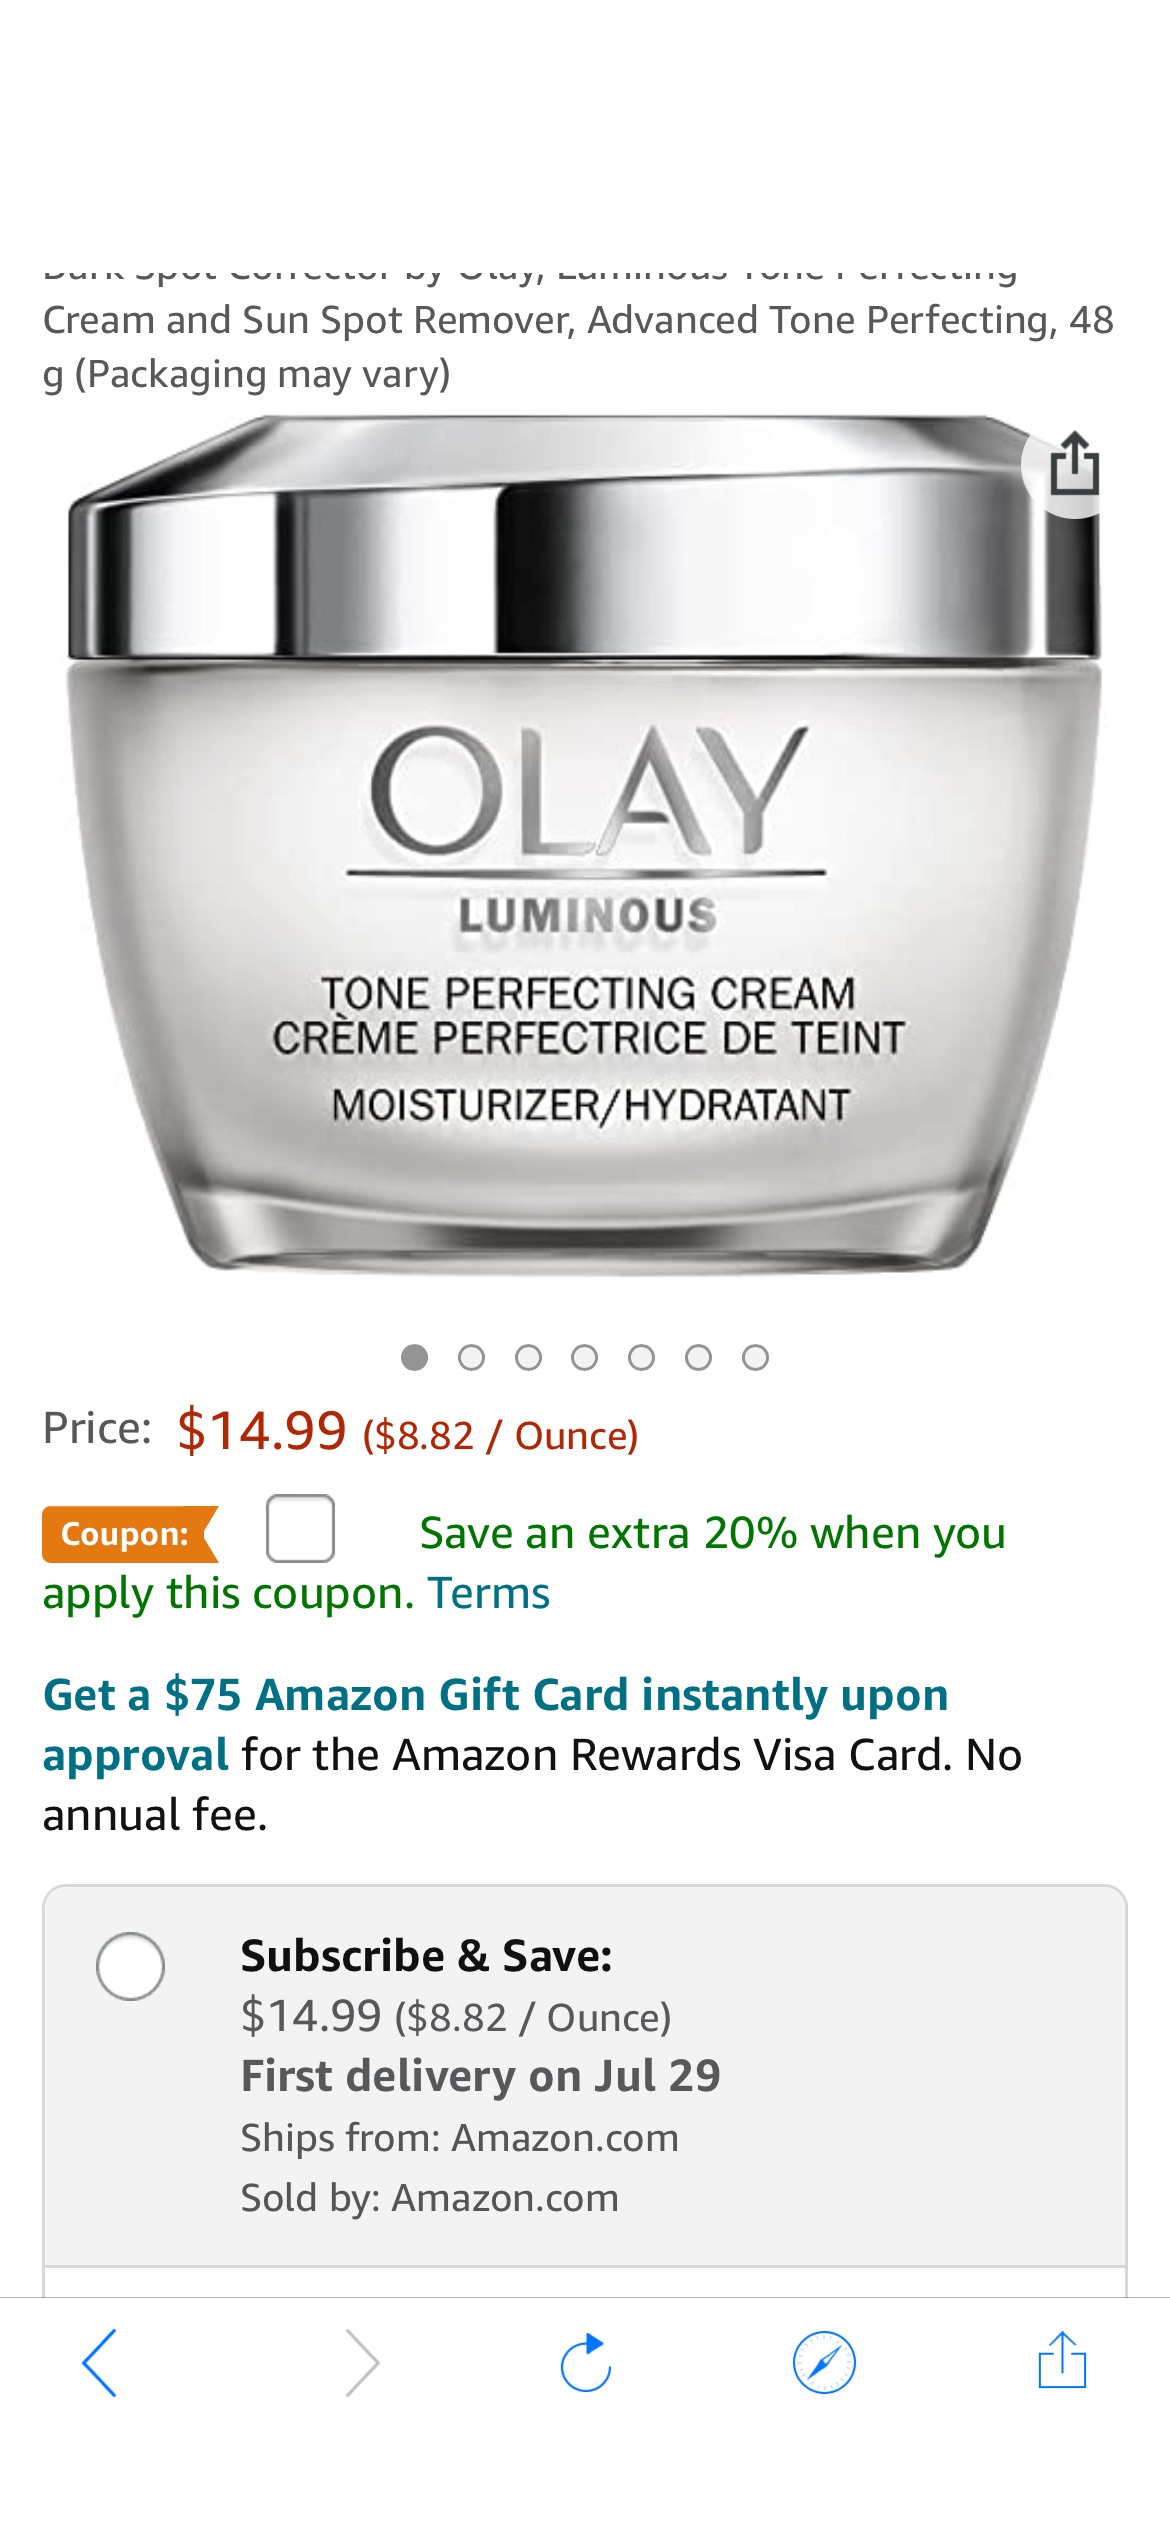 Amazon.com: Dark Spot Corrector by Olay, Luminous Tone Perfecting Cream and Sun Spot Remover, Advanced Tone Perfecting, 48 g (Packaging may vary) : Beauty & Personal Care 玉兰油20%off